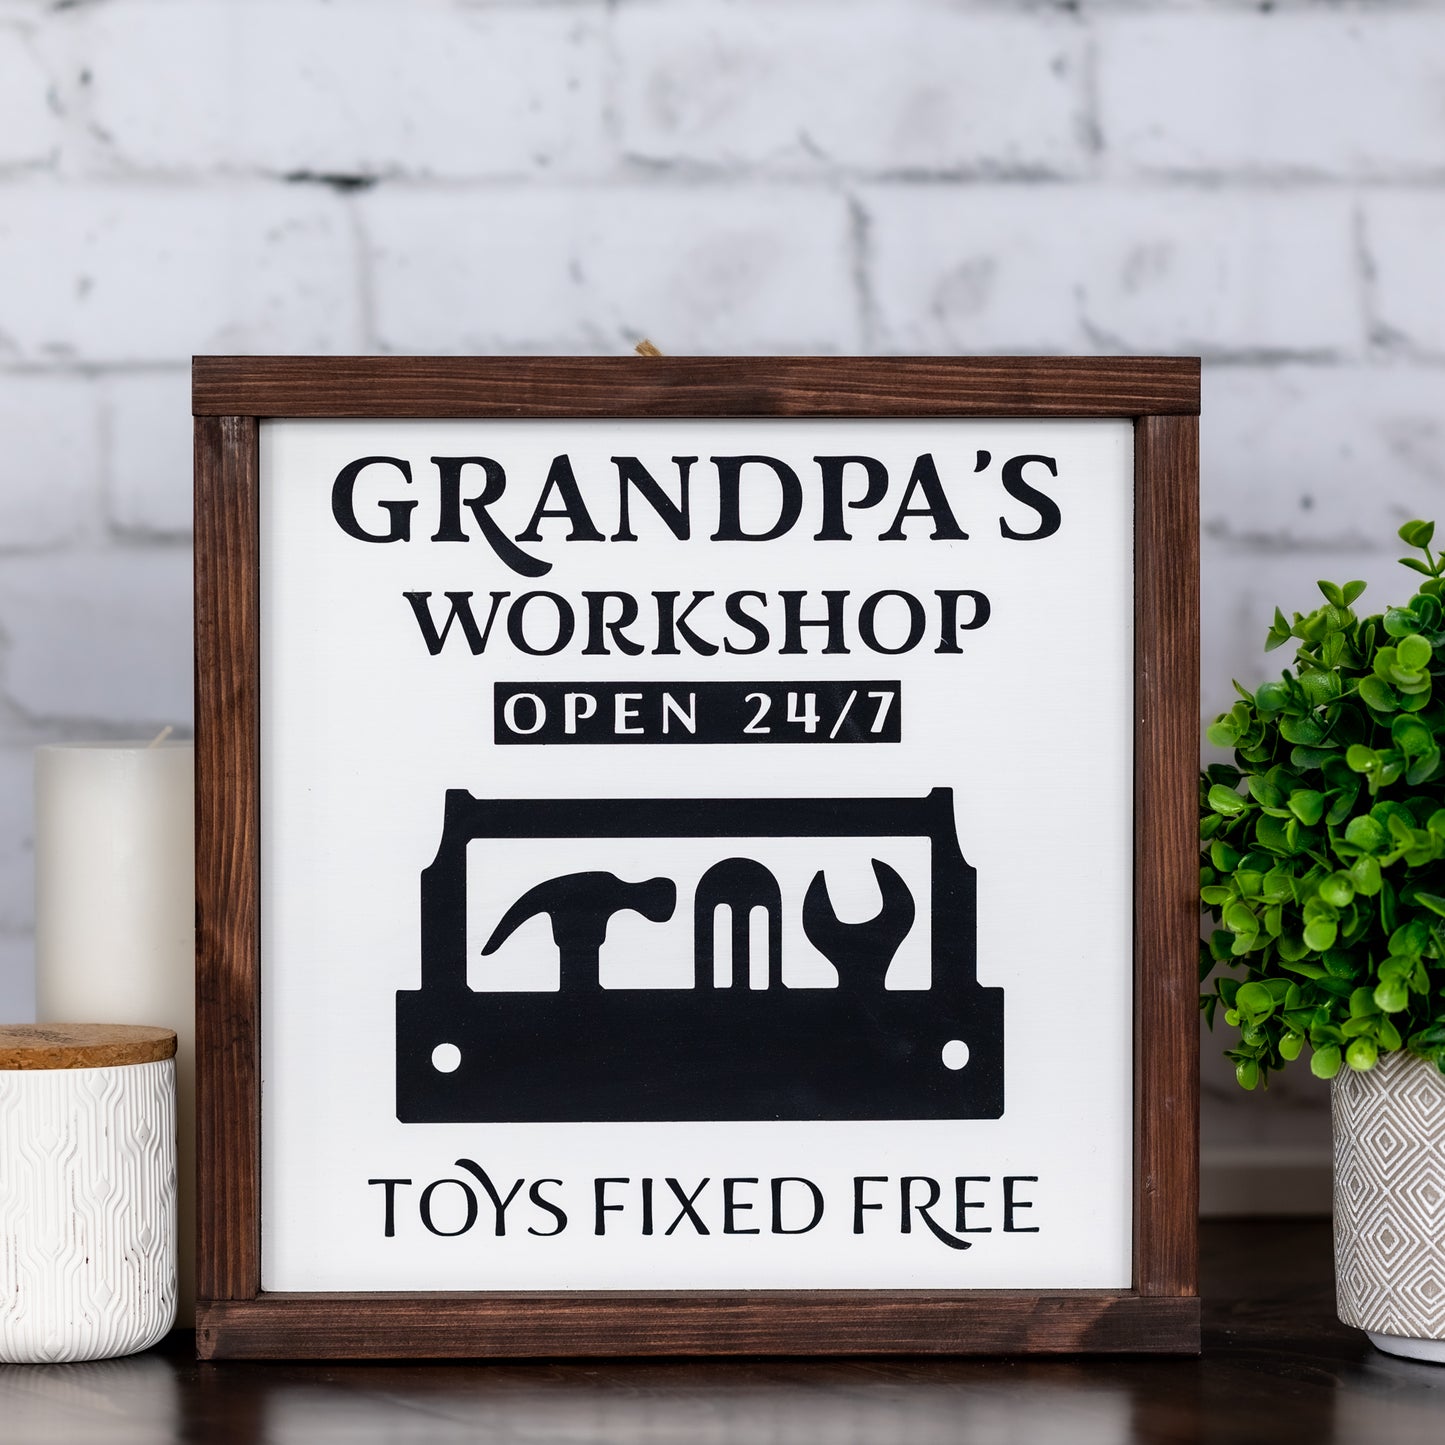 grandpa's workshop / dad's workshop open 24/7 toys fixed free ~ wood sign